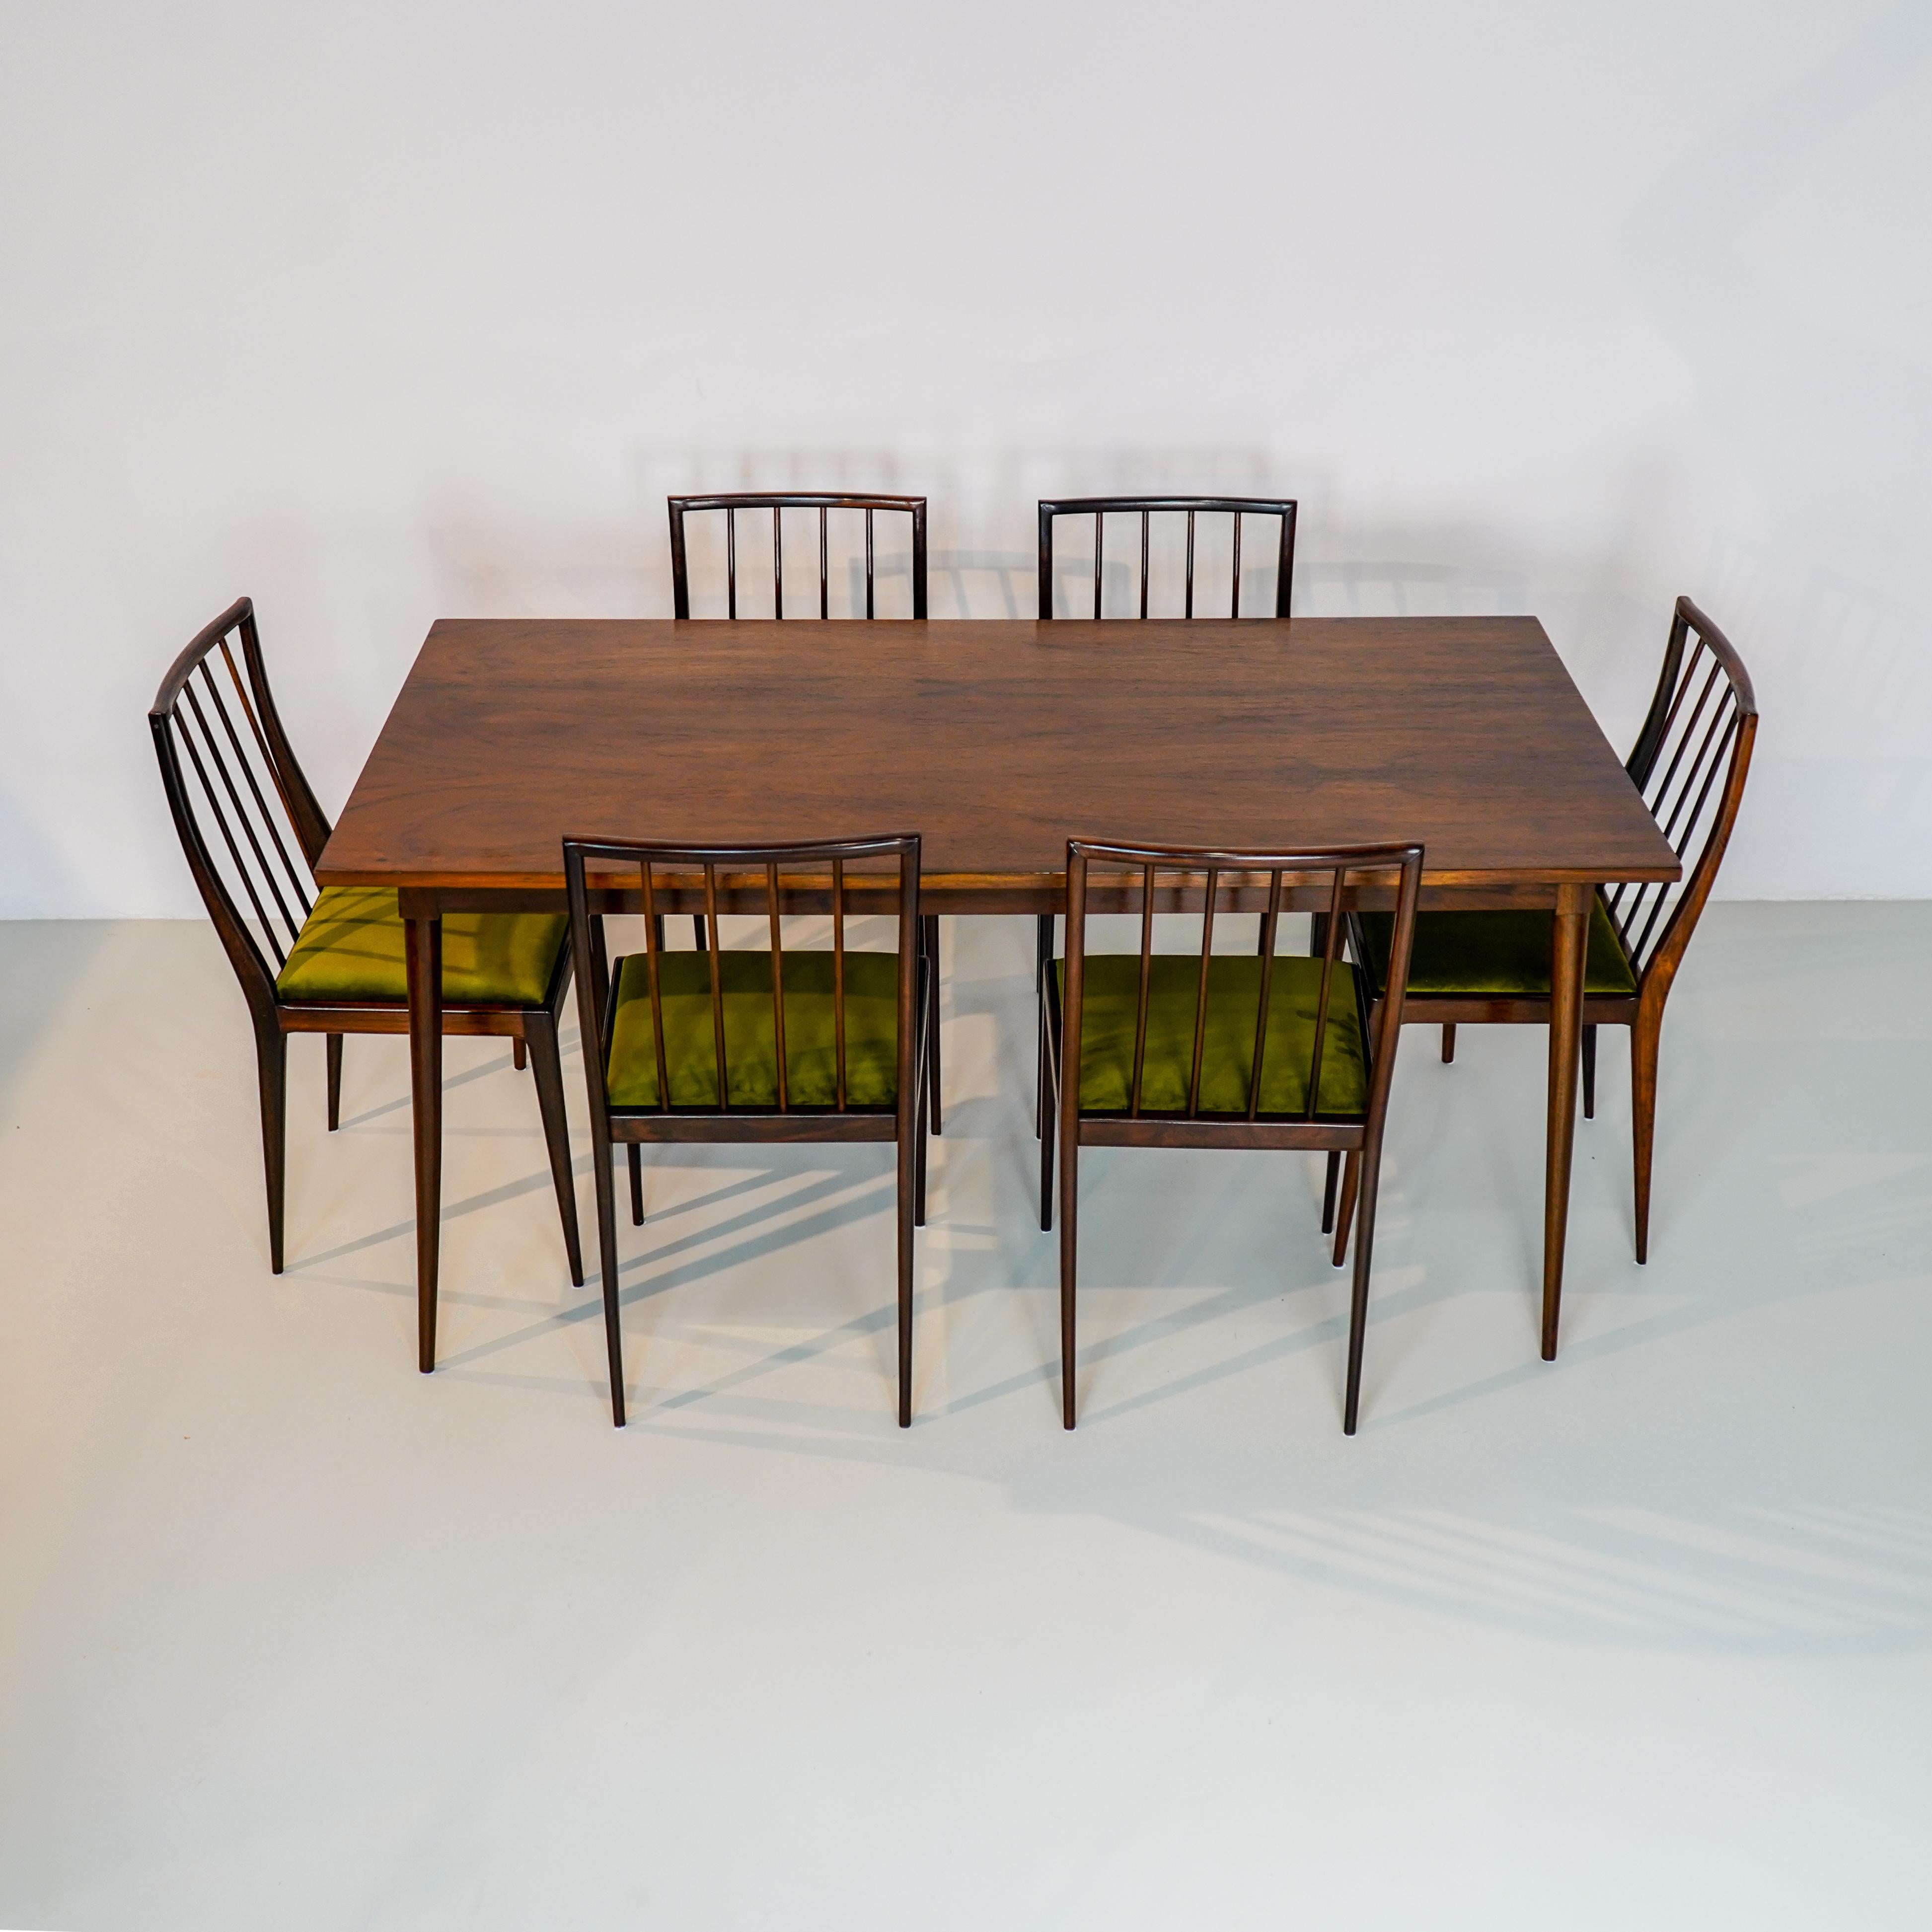 GB01 RIPAS - 6 chairs and sealed table in Rosewood, Geraldo de Barro Unilabor For Sale 3